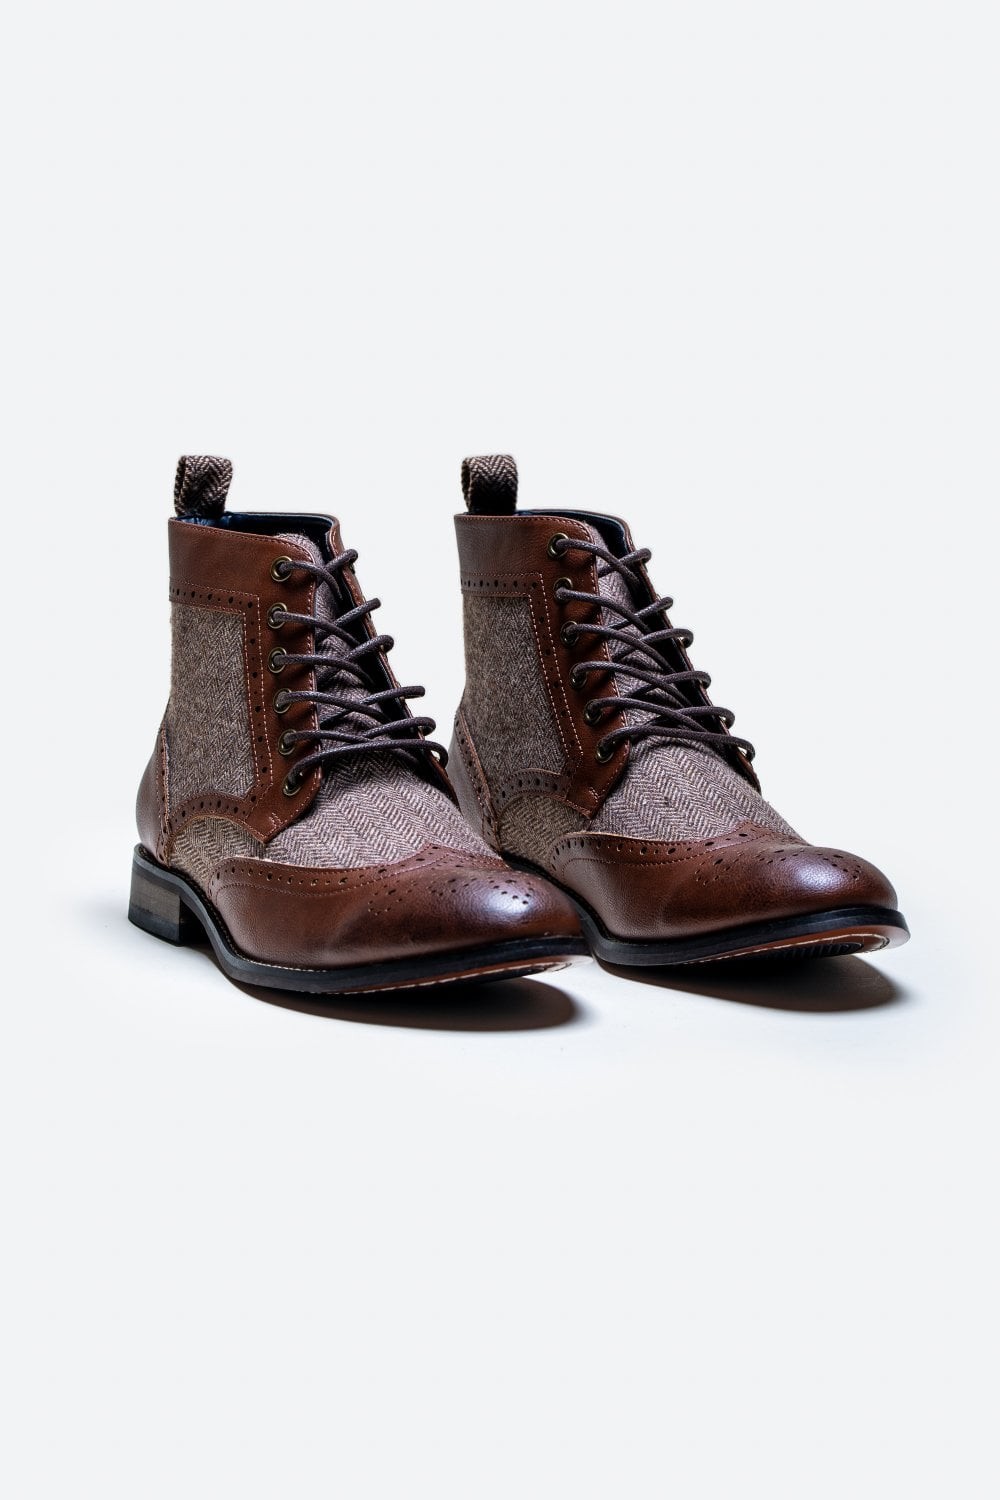 Men's Ankle Boots Lace Up Brogue Footwear - Braun